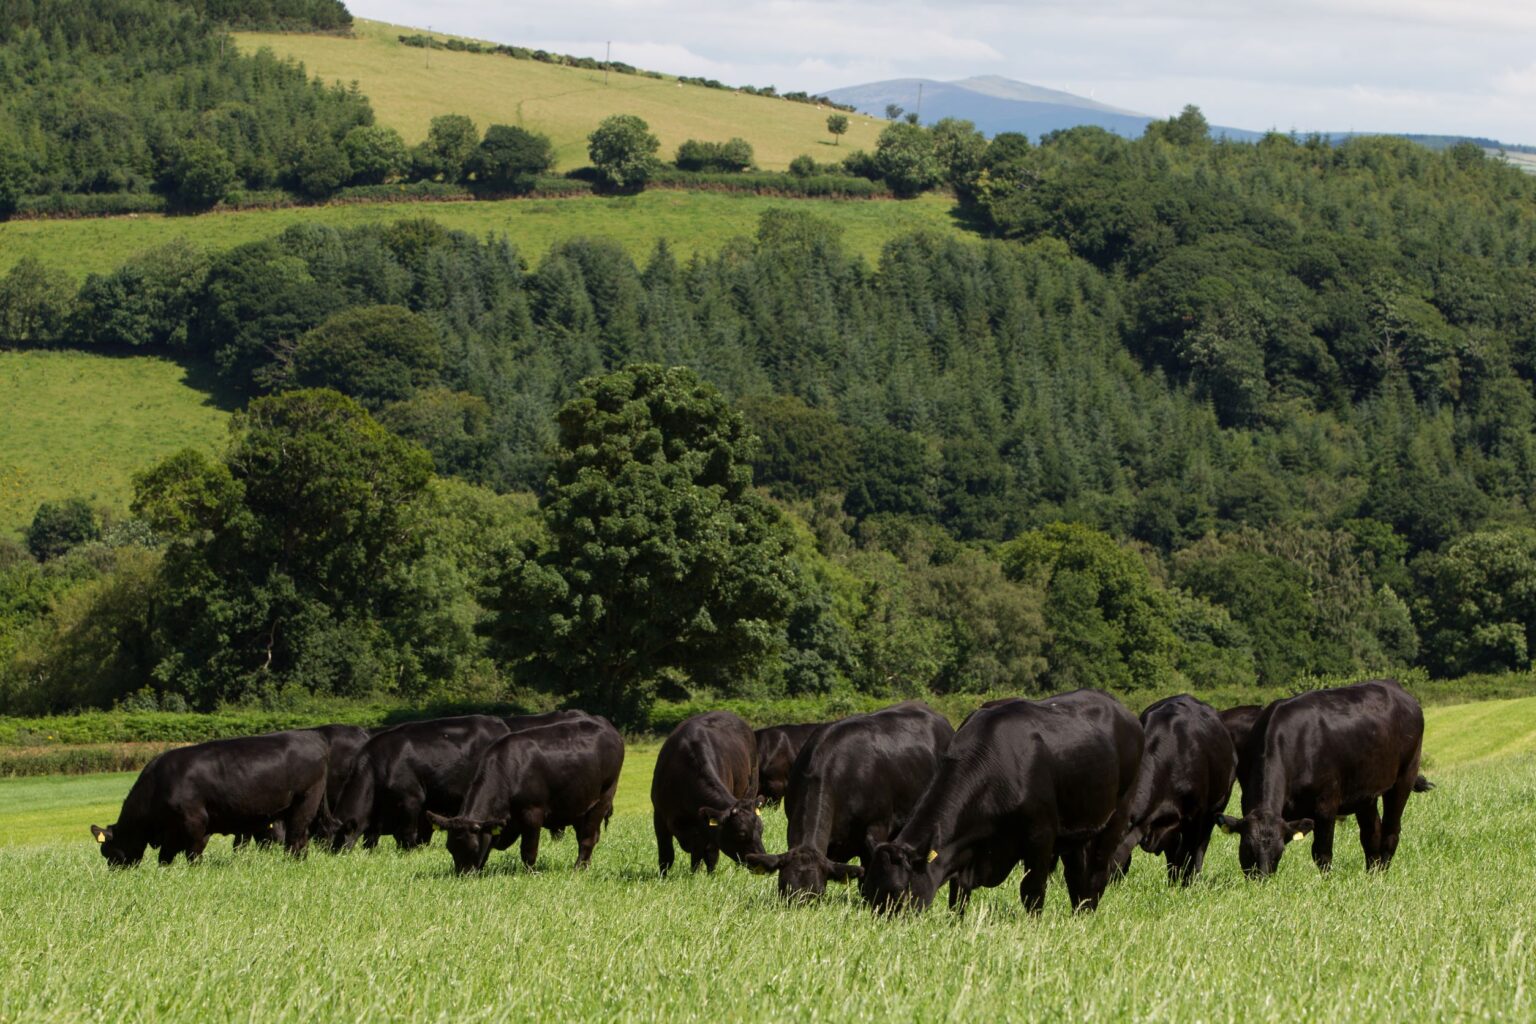 Cattle at ABP Clonegal Farm in Carlow